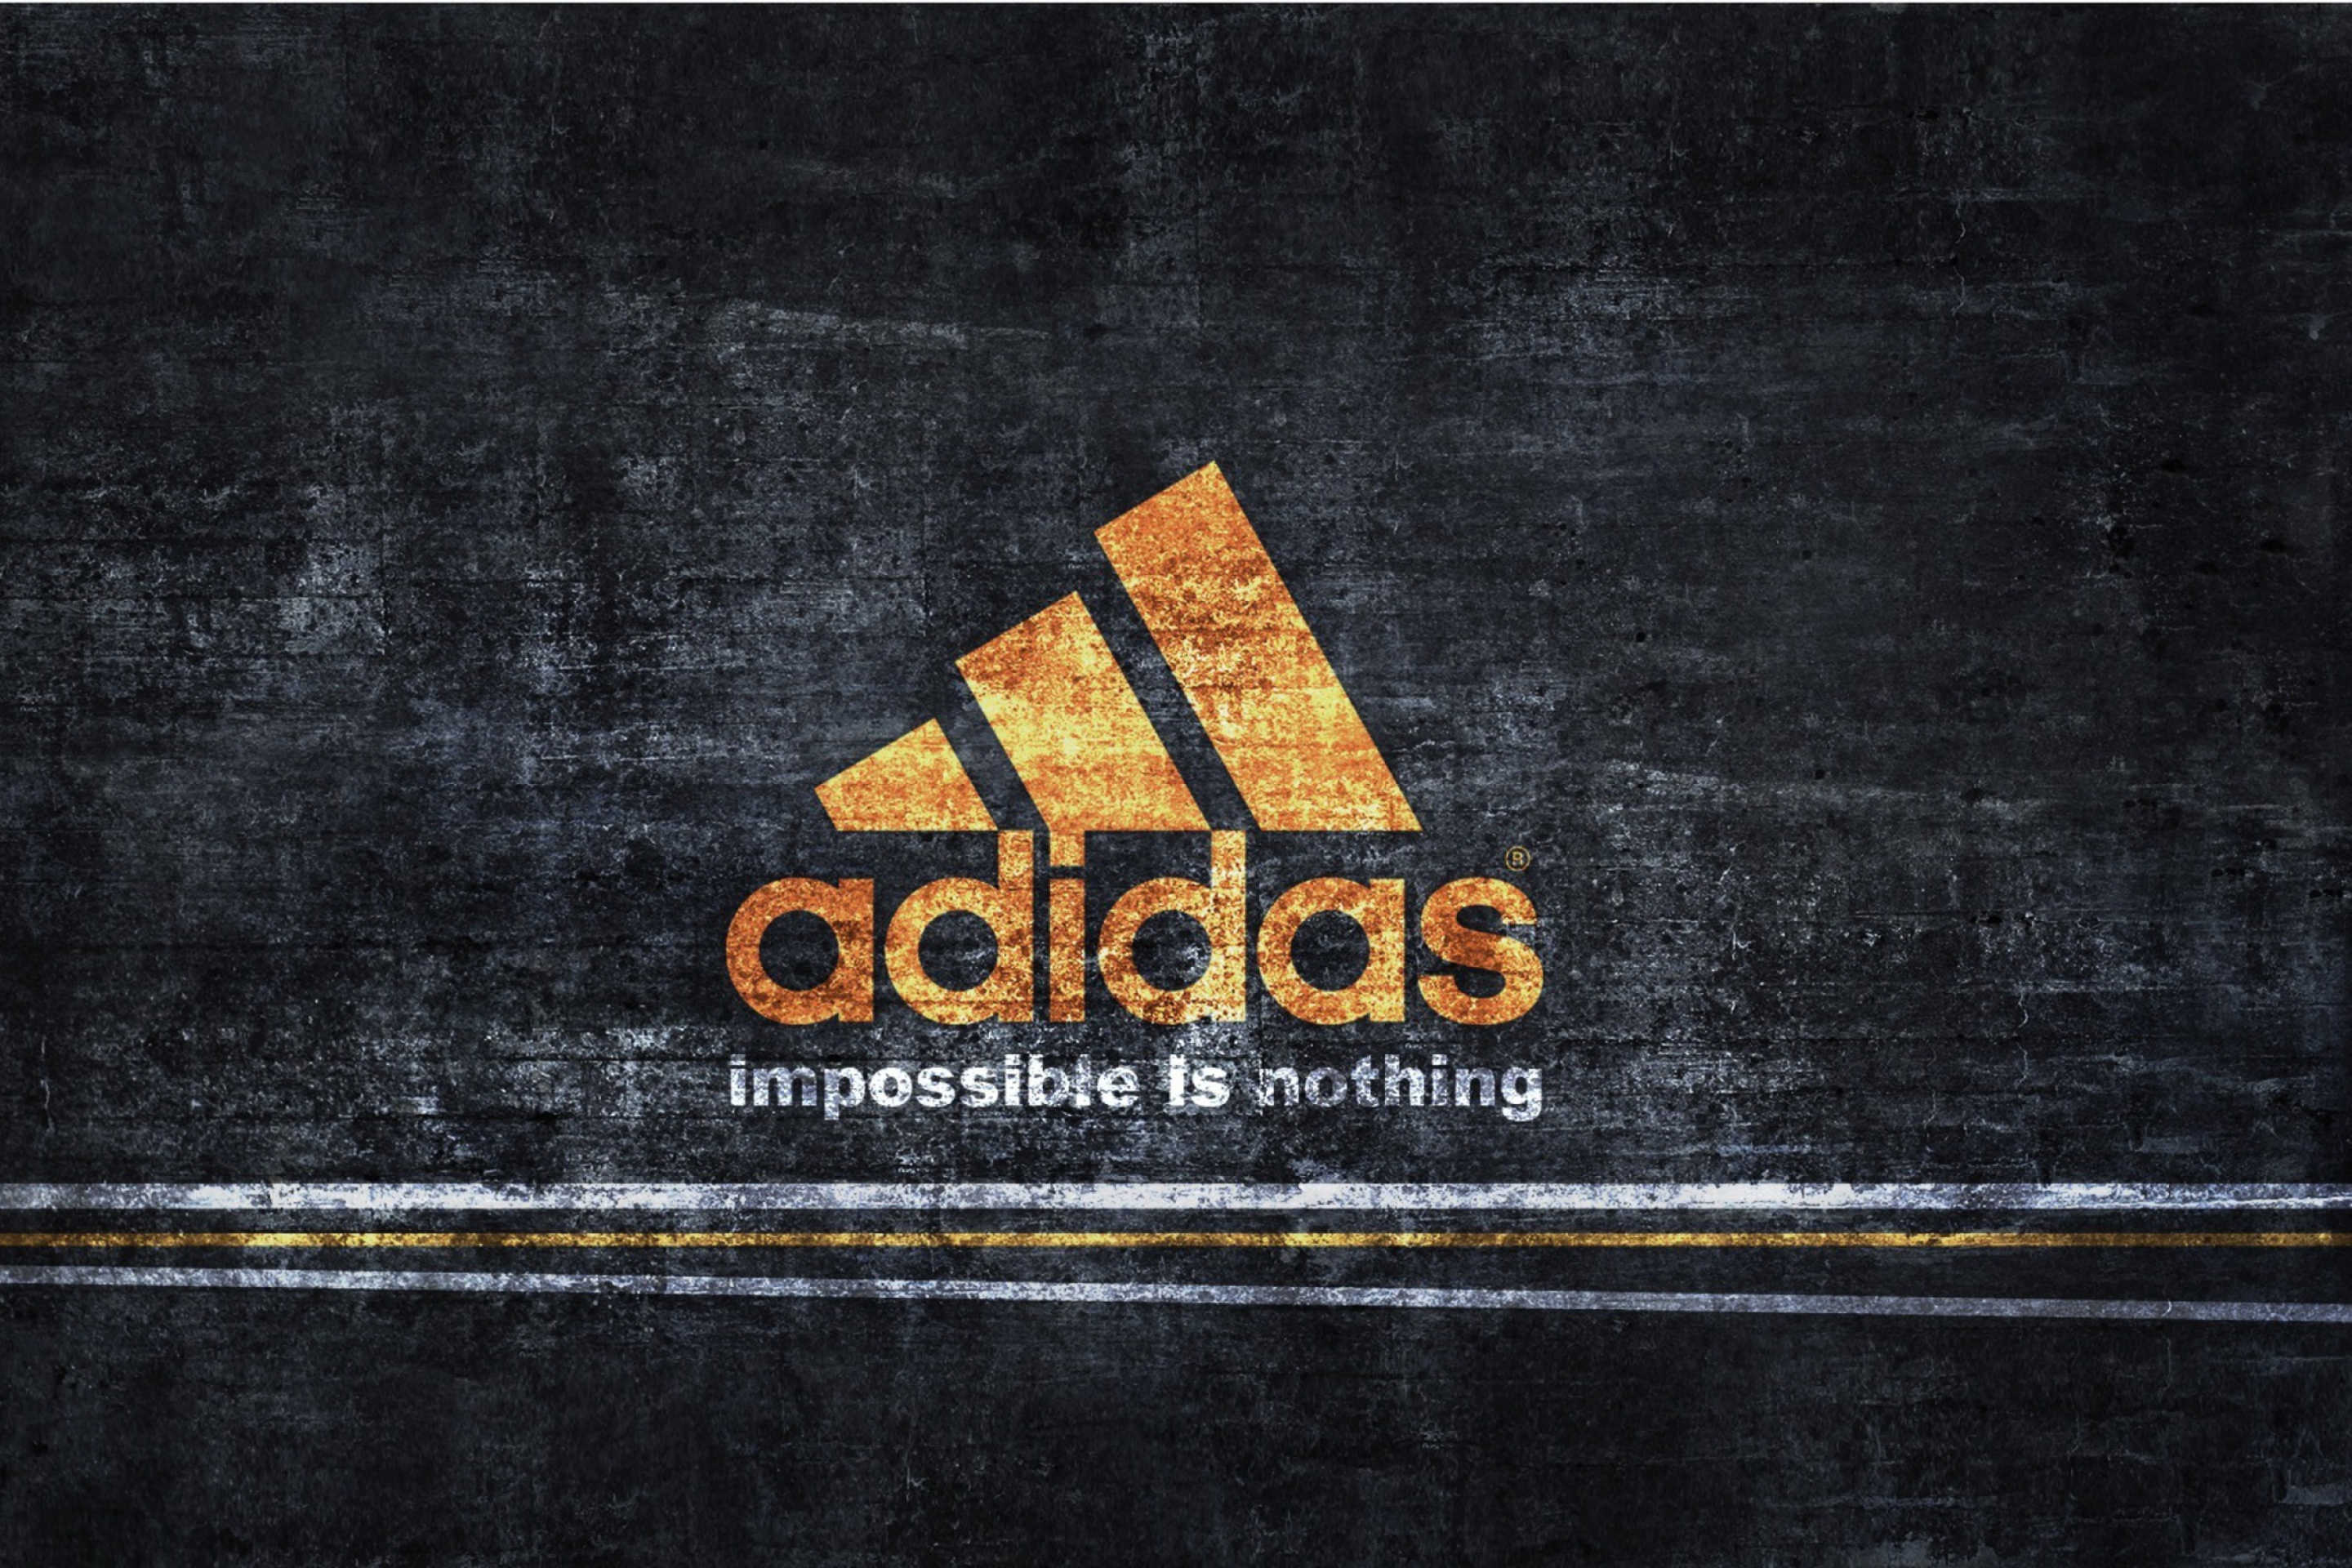 Adidas – Impossible is Nothing wallpaper 2880x1920